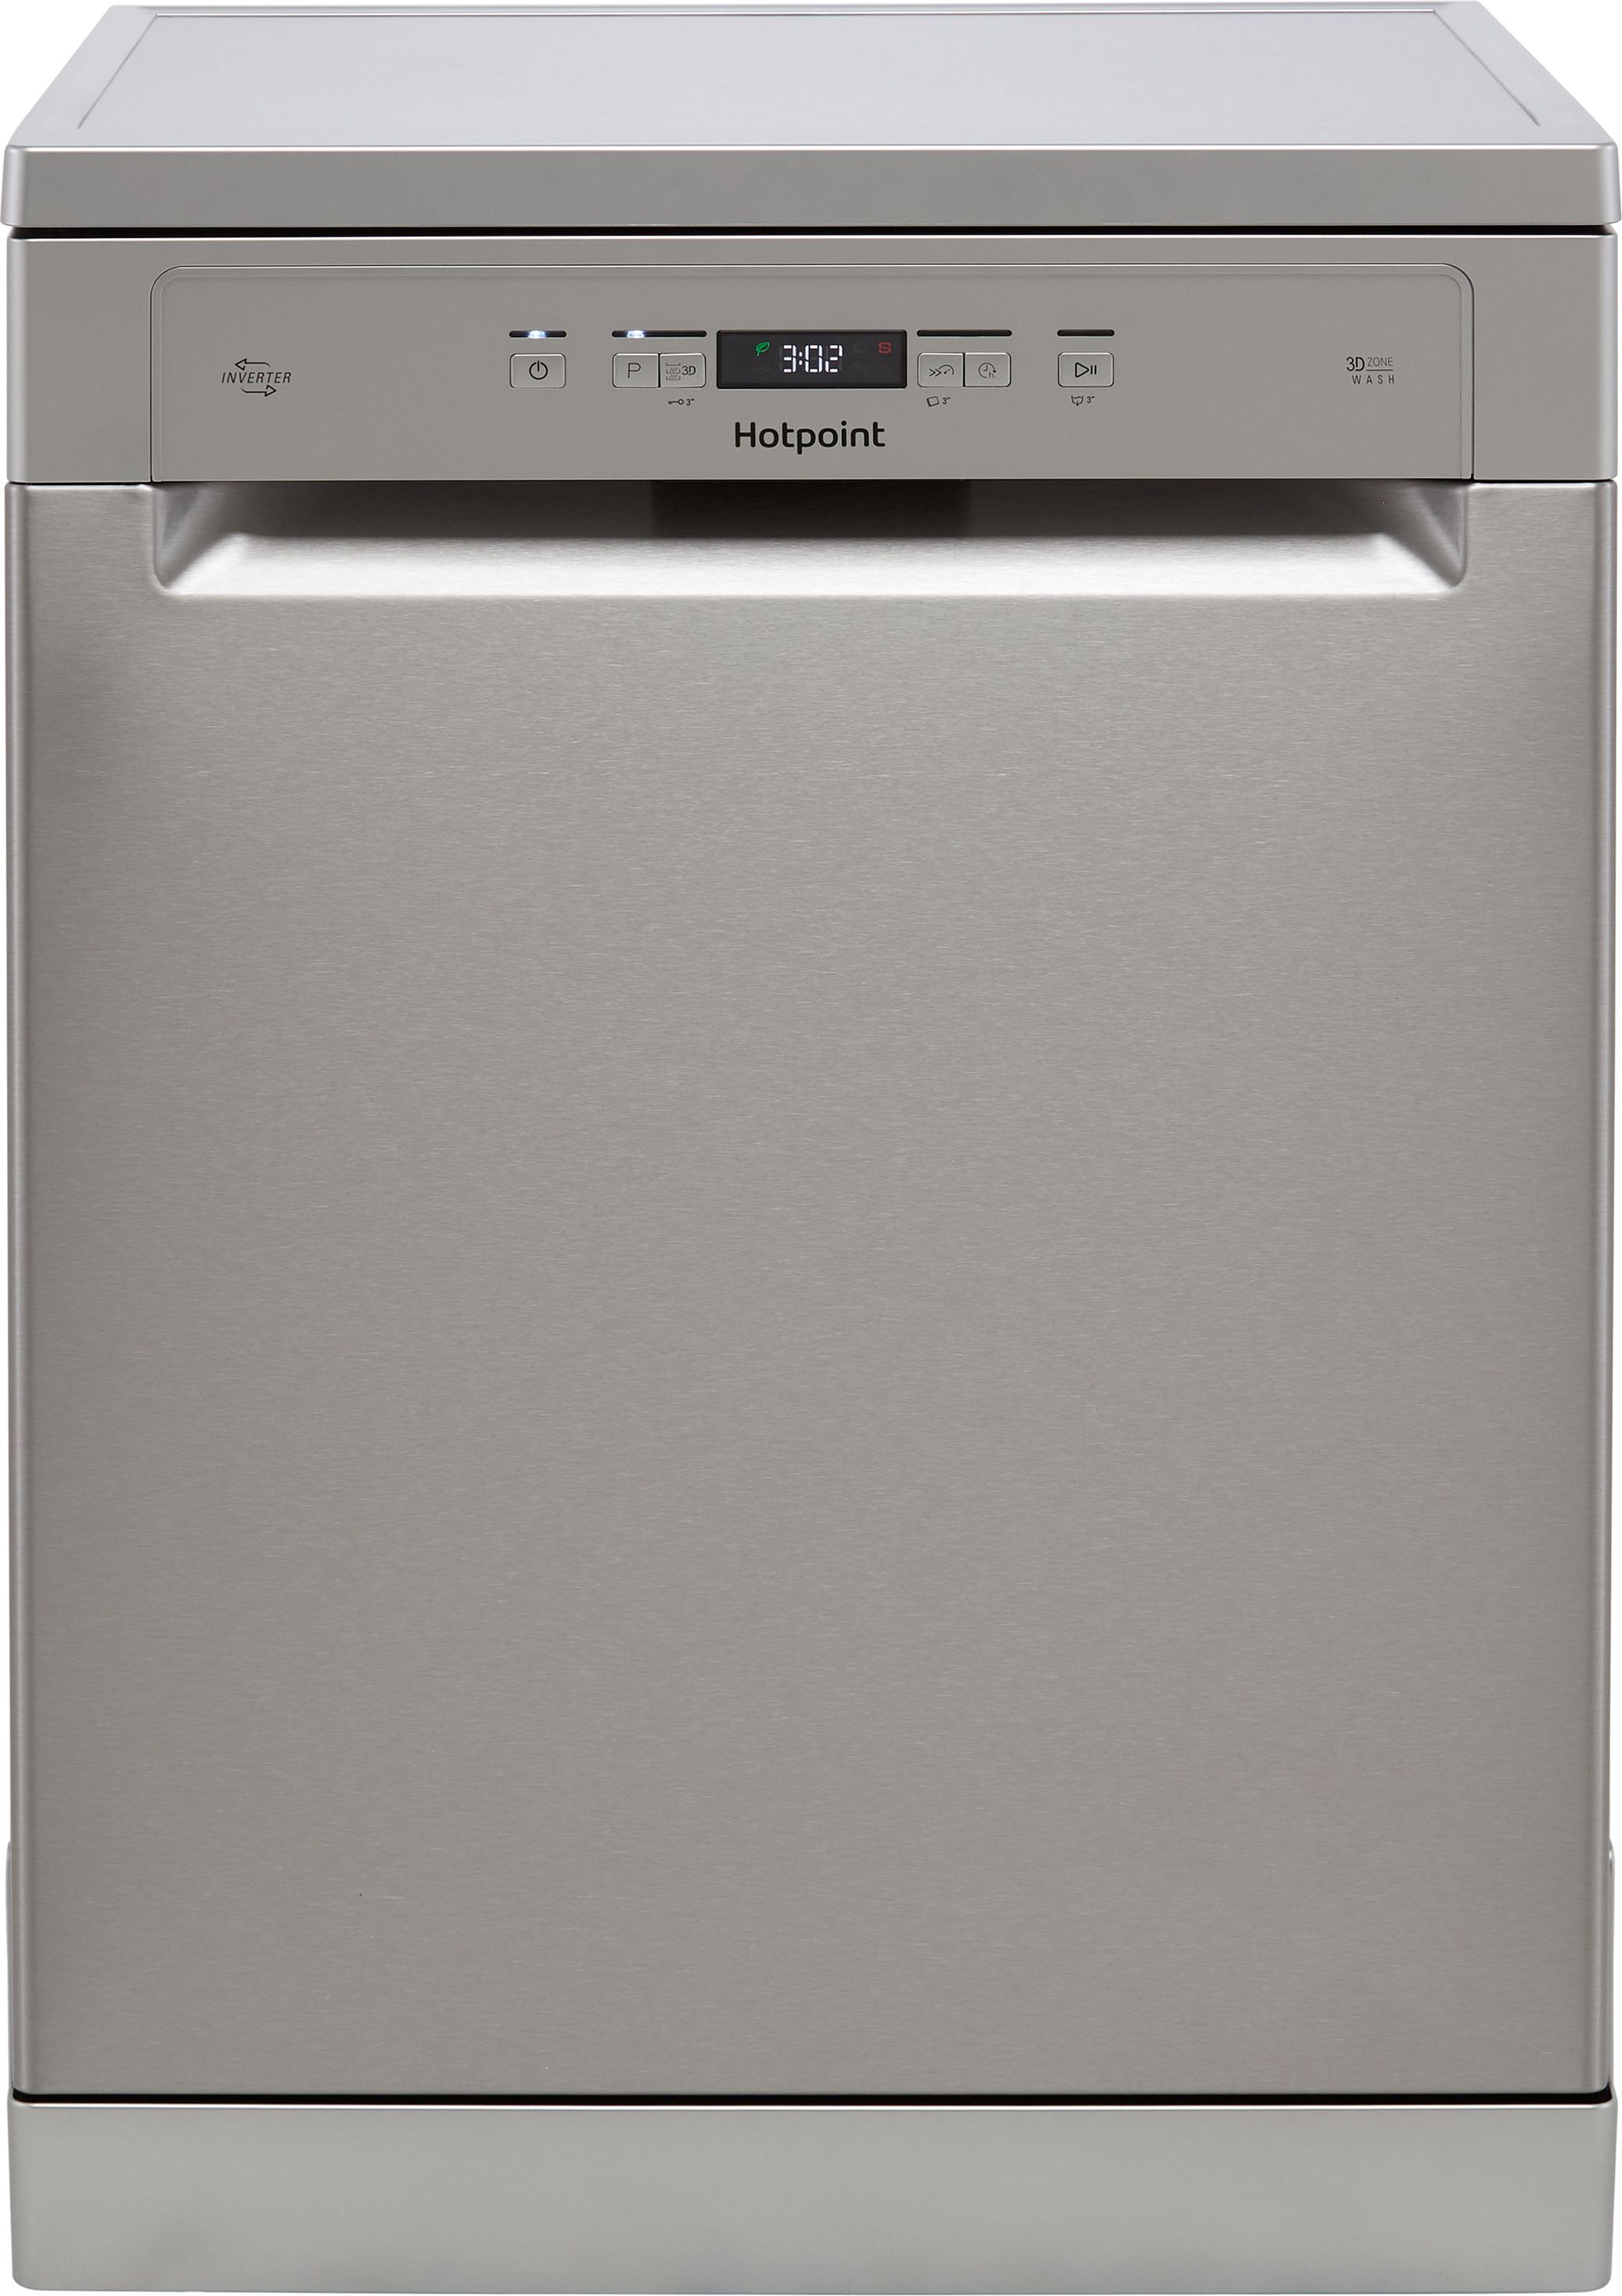 Hotpoint HFC3T232WFGXUK Standard Dishwasher - Stainless Steel - D Rated, Stainless Steel